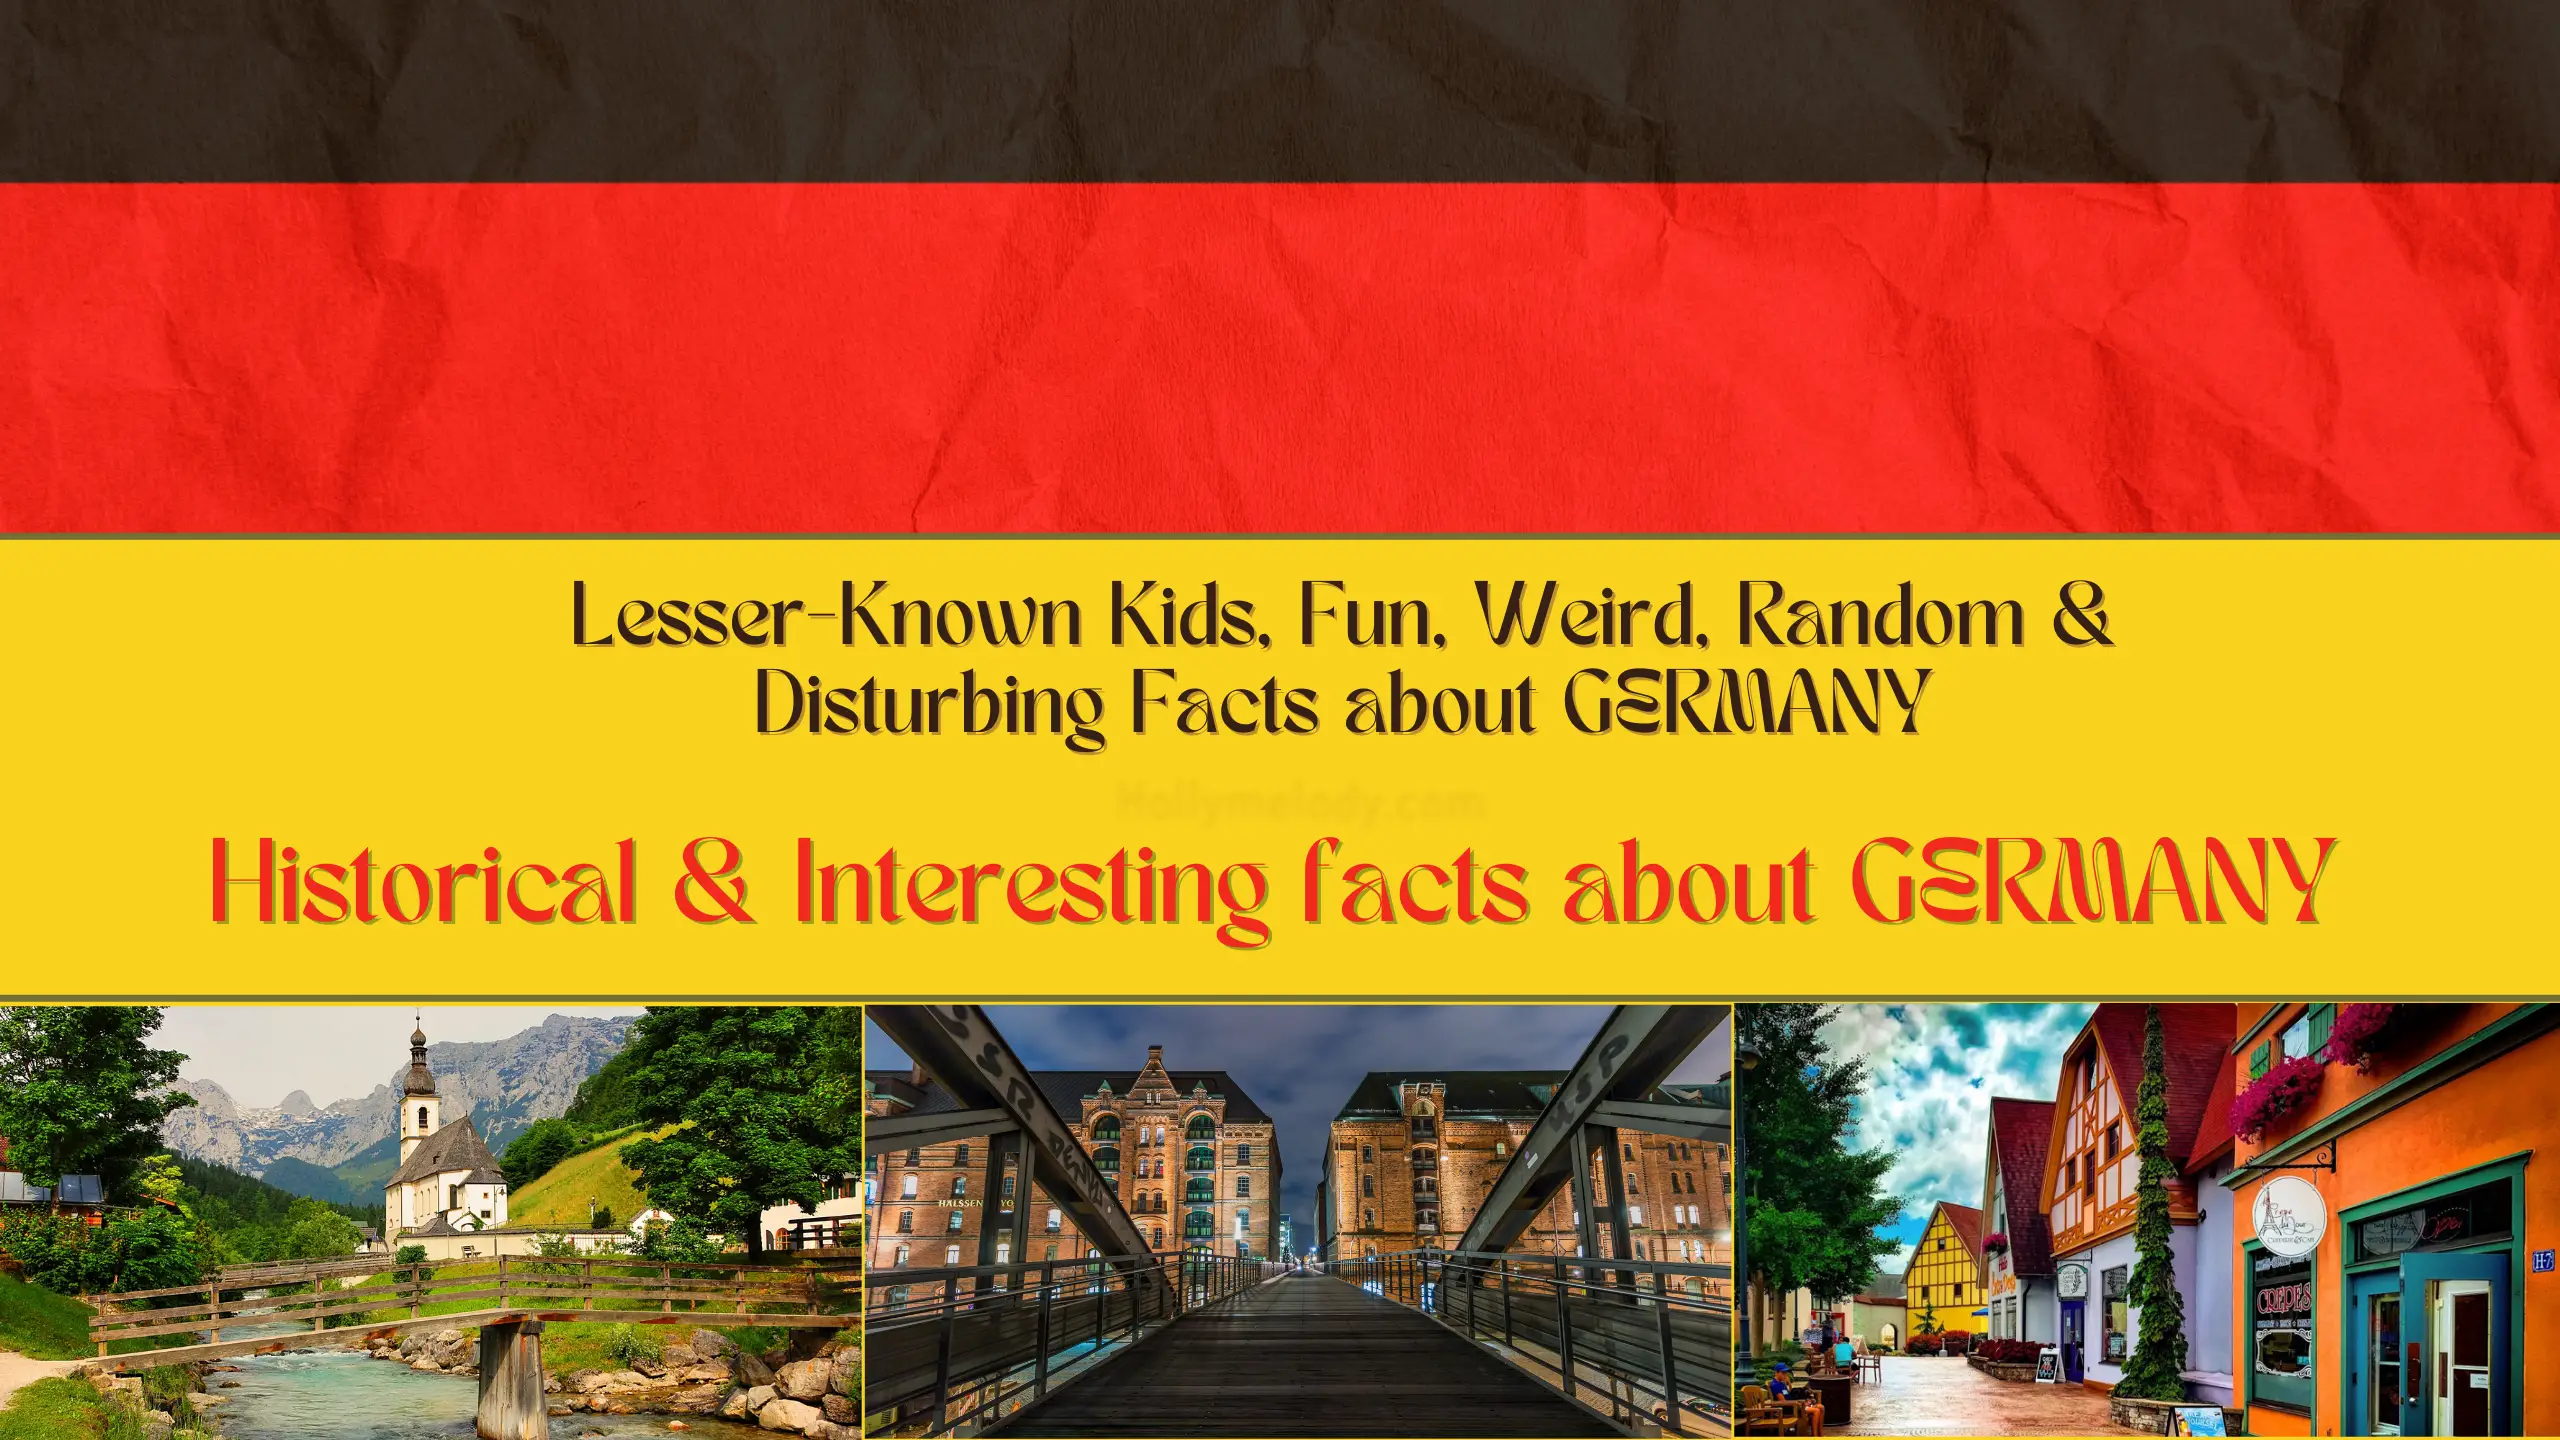 Historical & Interesting facts about GERMANY